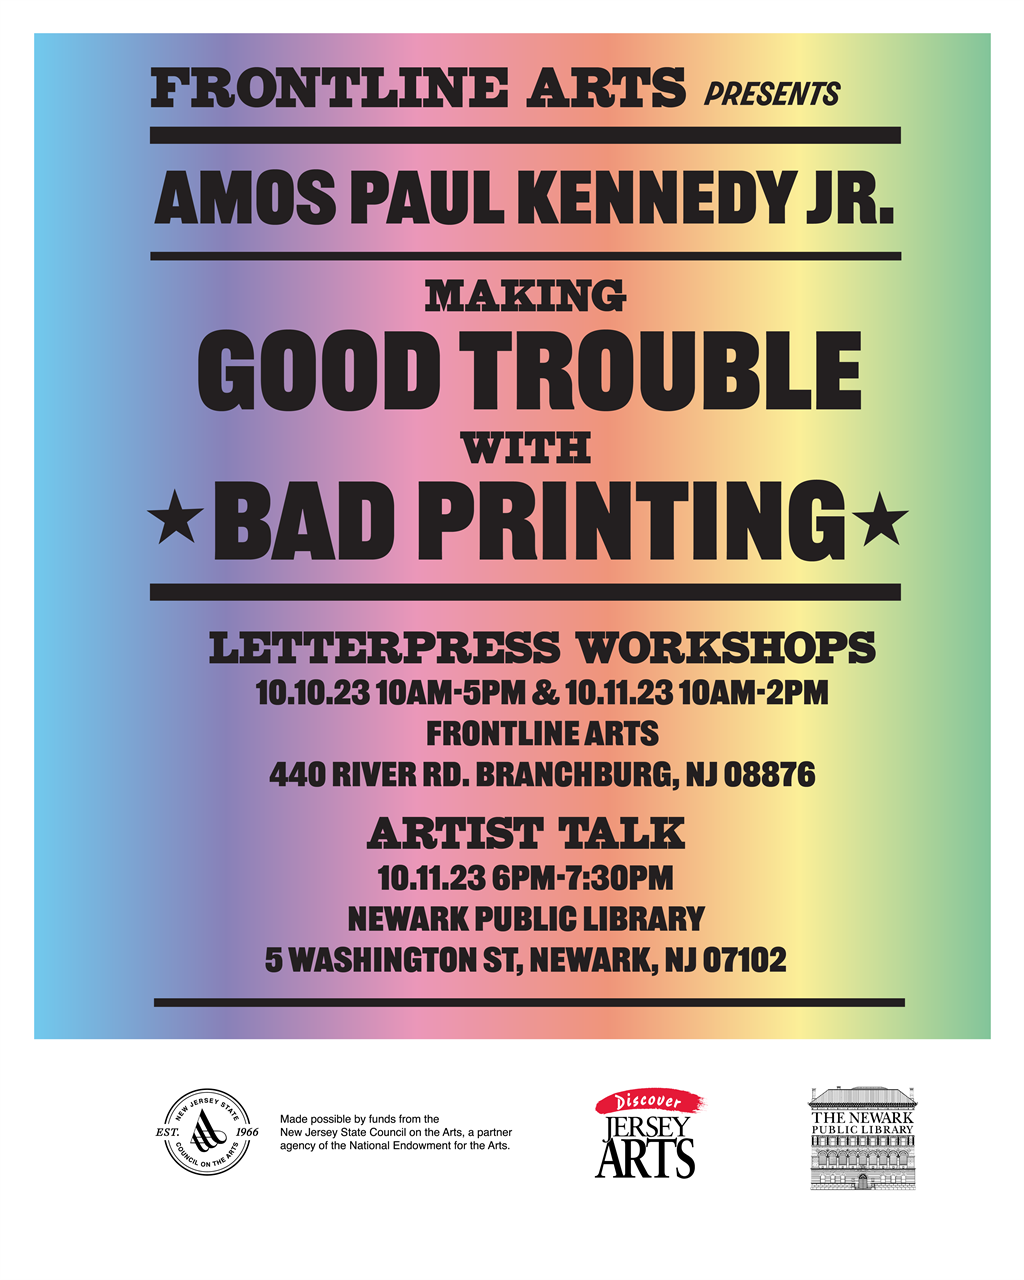 Event Poster for Amos Paul Kennedy Jr.'s visit. Included is information in body of this event posting, on a rainbow background in the style of letterpress broadside posters.